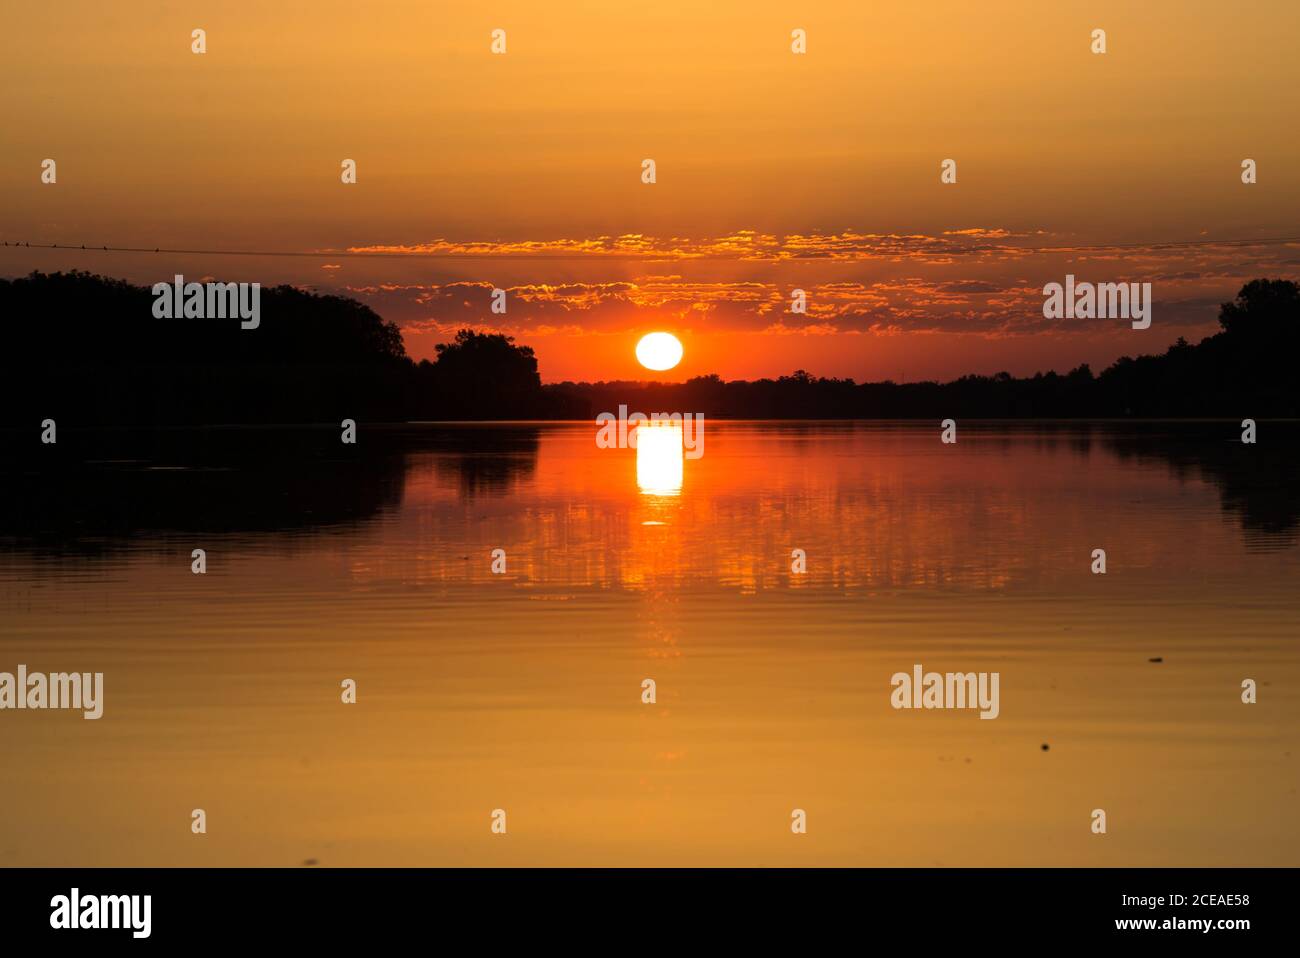 Beautiful sunrise over the river, lake. The orange sun disk is reflected on the surface of the water. Stock Photo